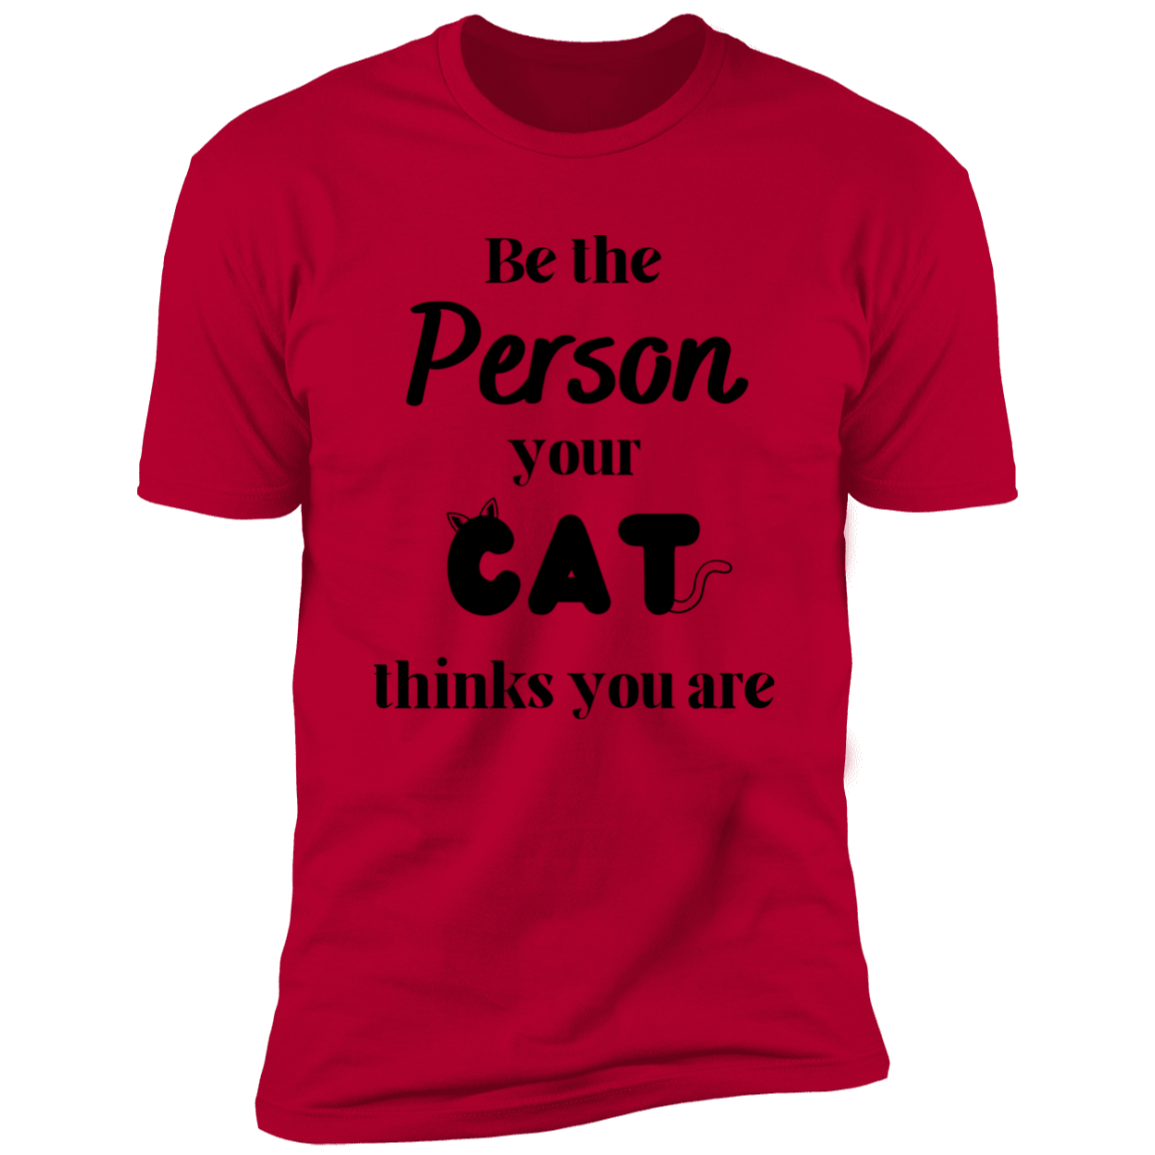 Be the Person Your Cat Thinks You Are T-shirt, Cat Shirt for humans, in red